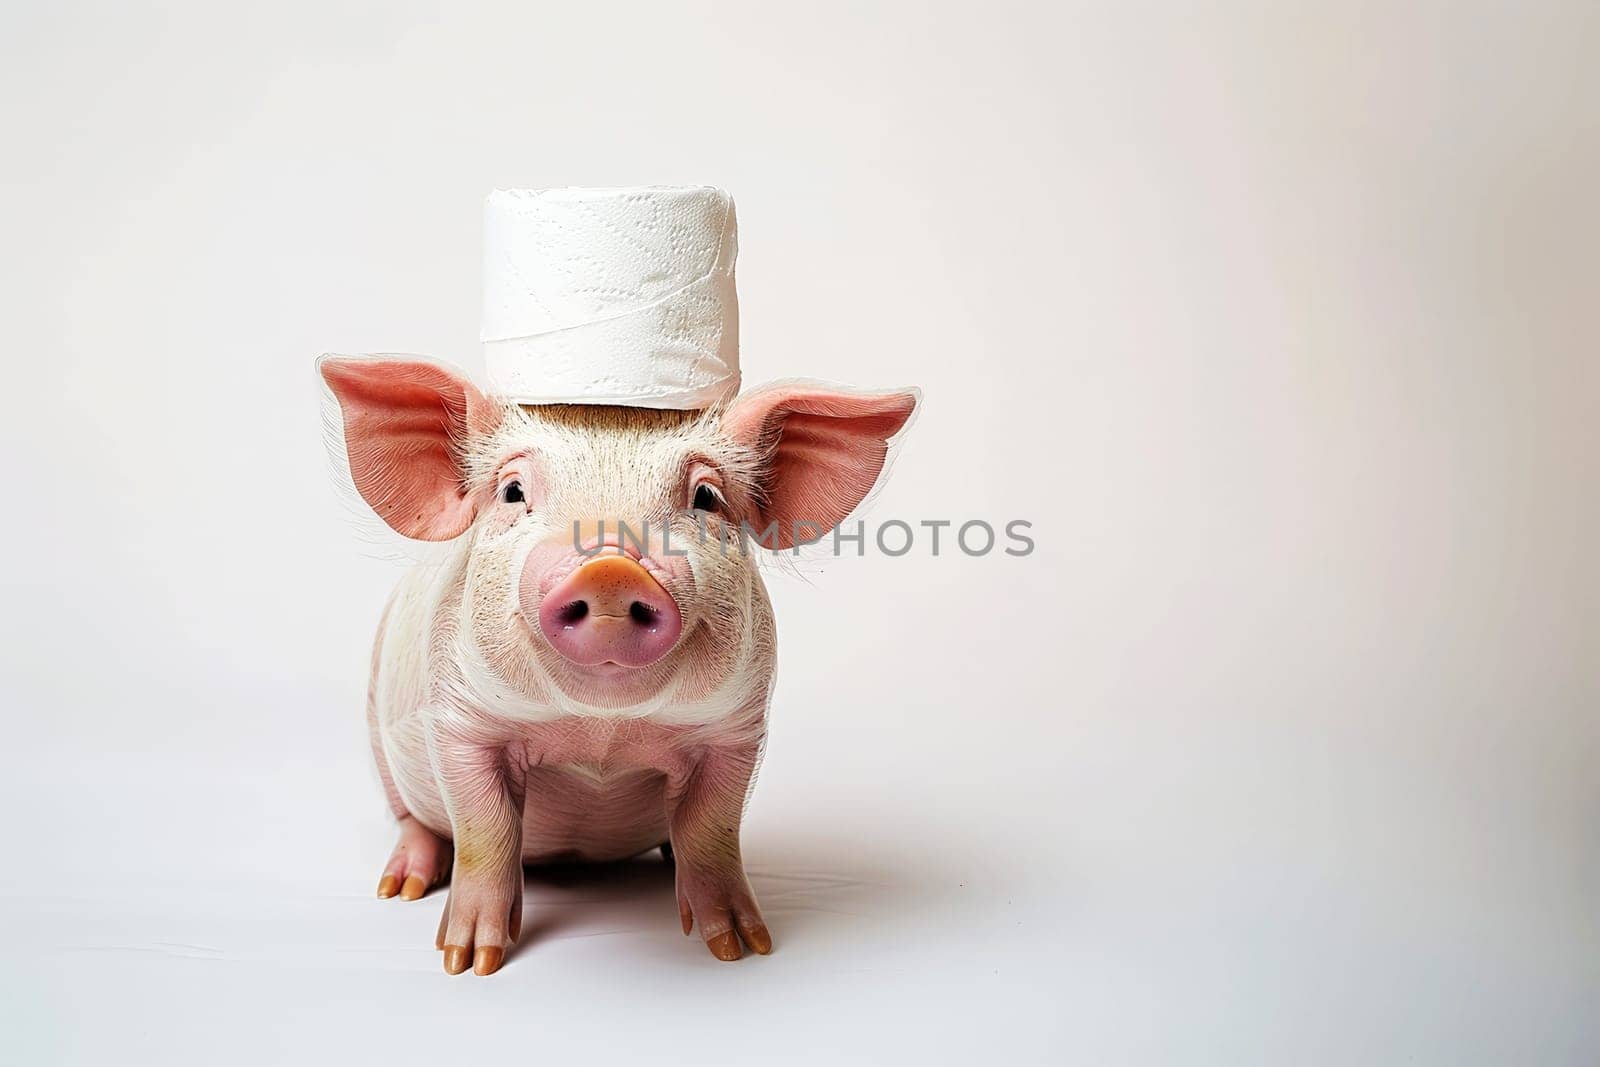 a tissue on head a cute pig standing on isolated background..